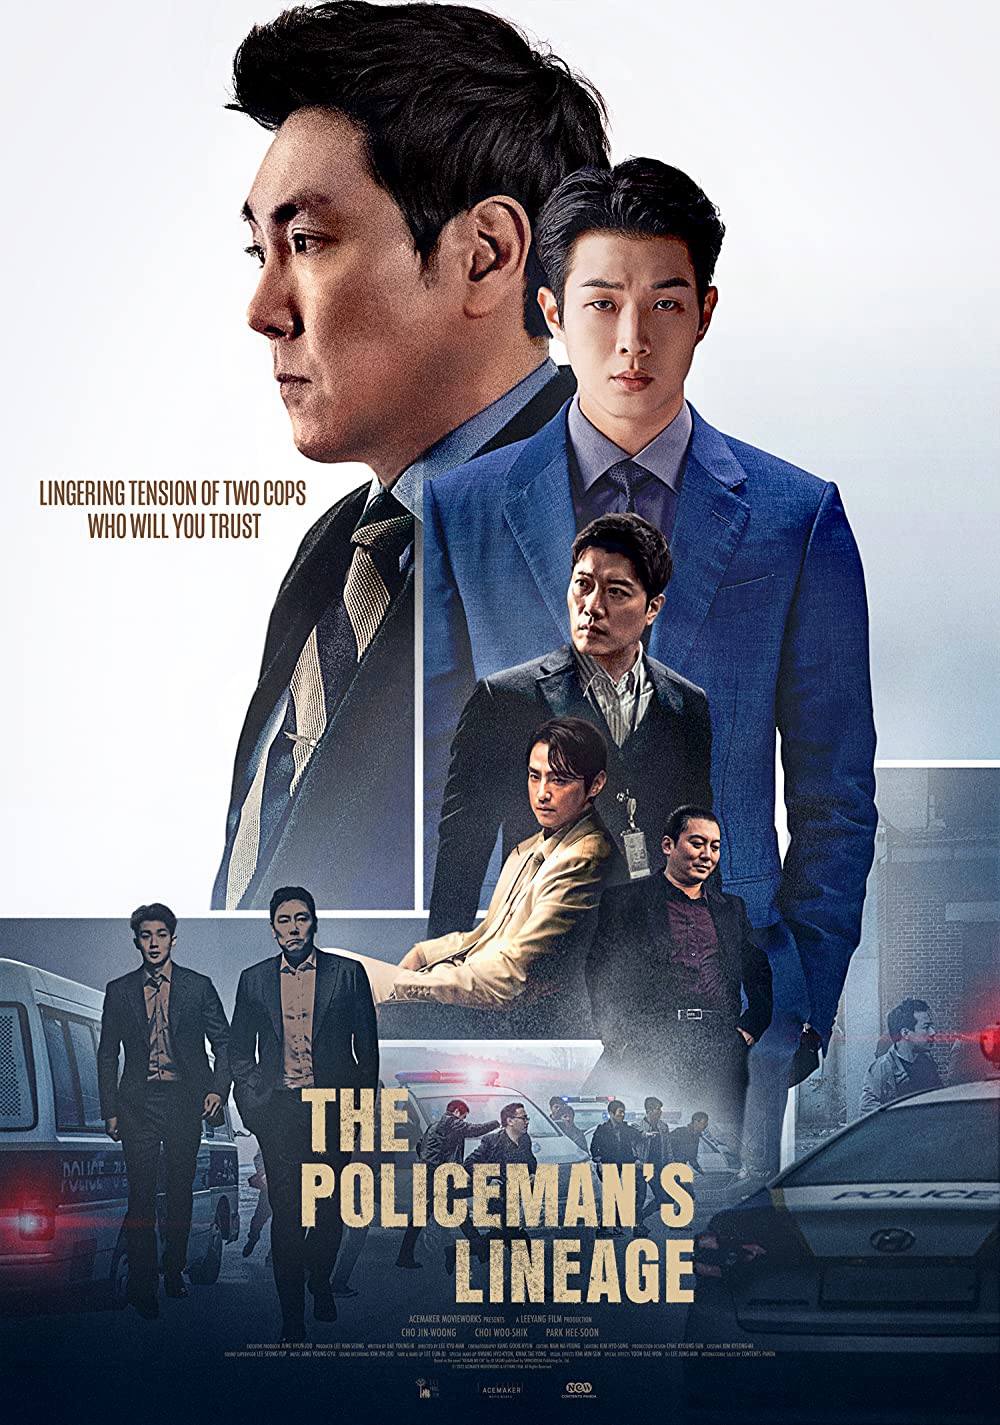 Poster Phim The Policeman's Lineage (The Policeman's Lineage)